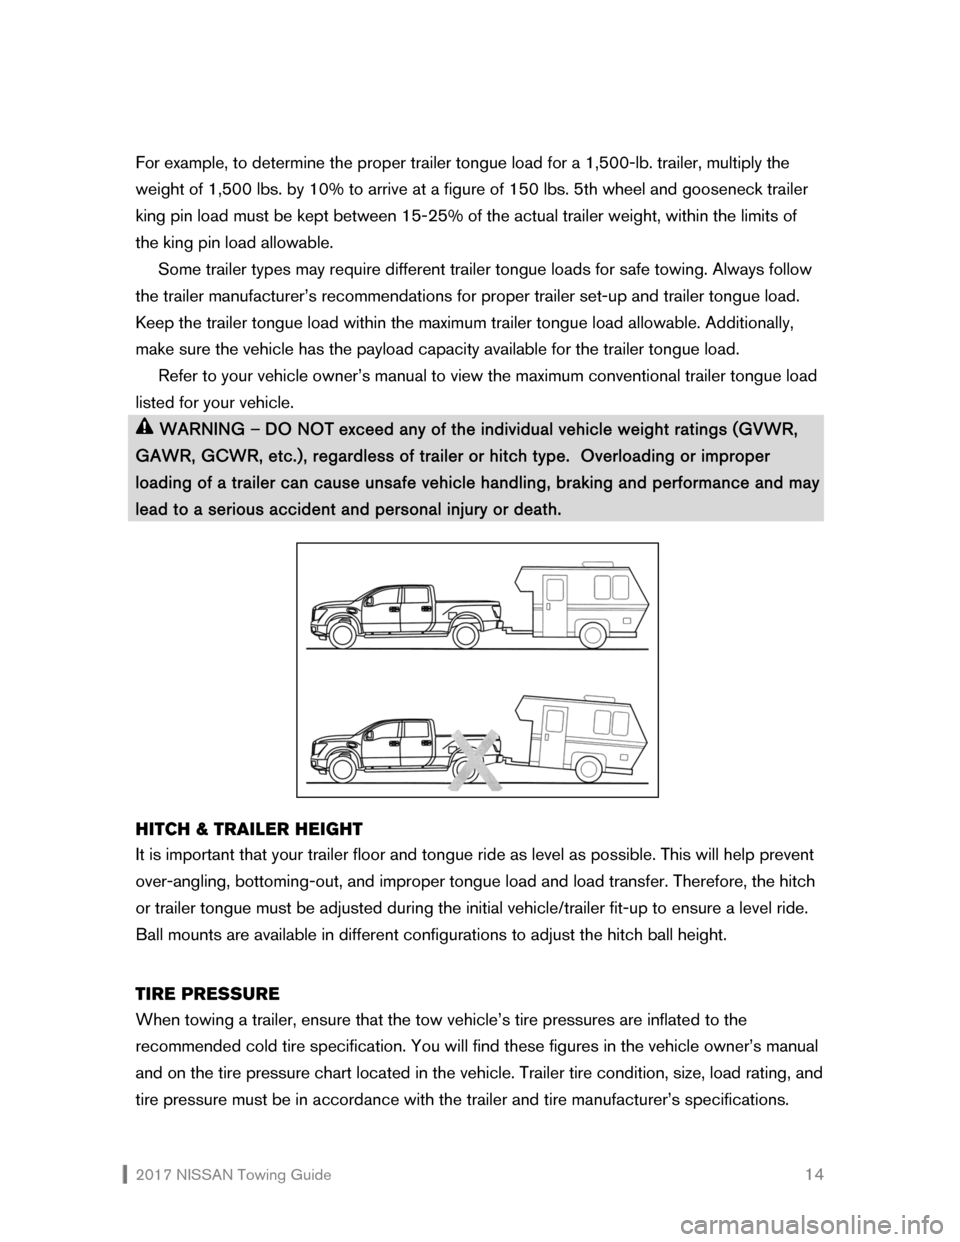 NISSAN NV200 2017 1.G Towing Guide  2017 NISSAN Towing Guide    14
For example, to determine the proper trailer tongue load for a 1,500-lb. trailer, multiply the 
weight of 1,500 lbs. by 10% to arrive at a figure of 150 lbs. 5th wheel 